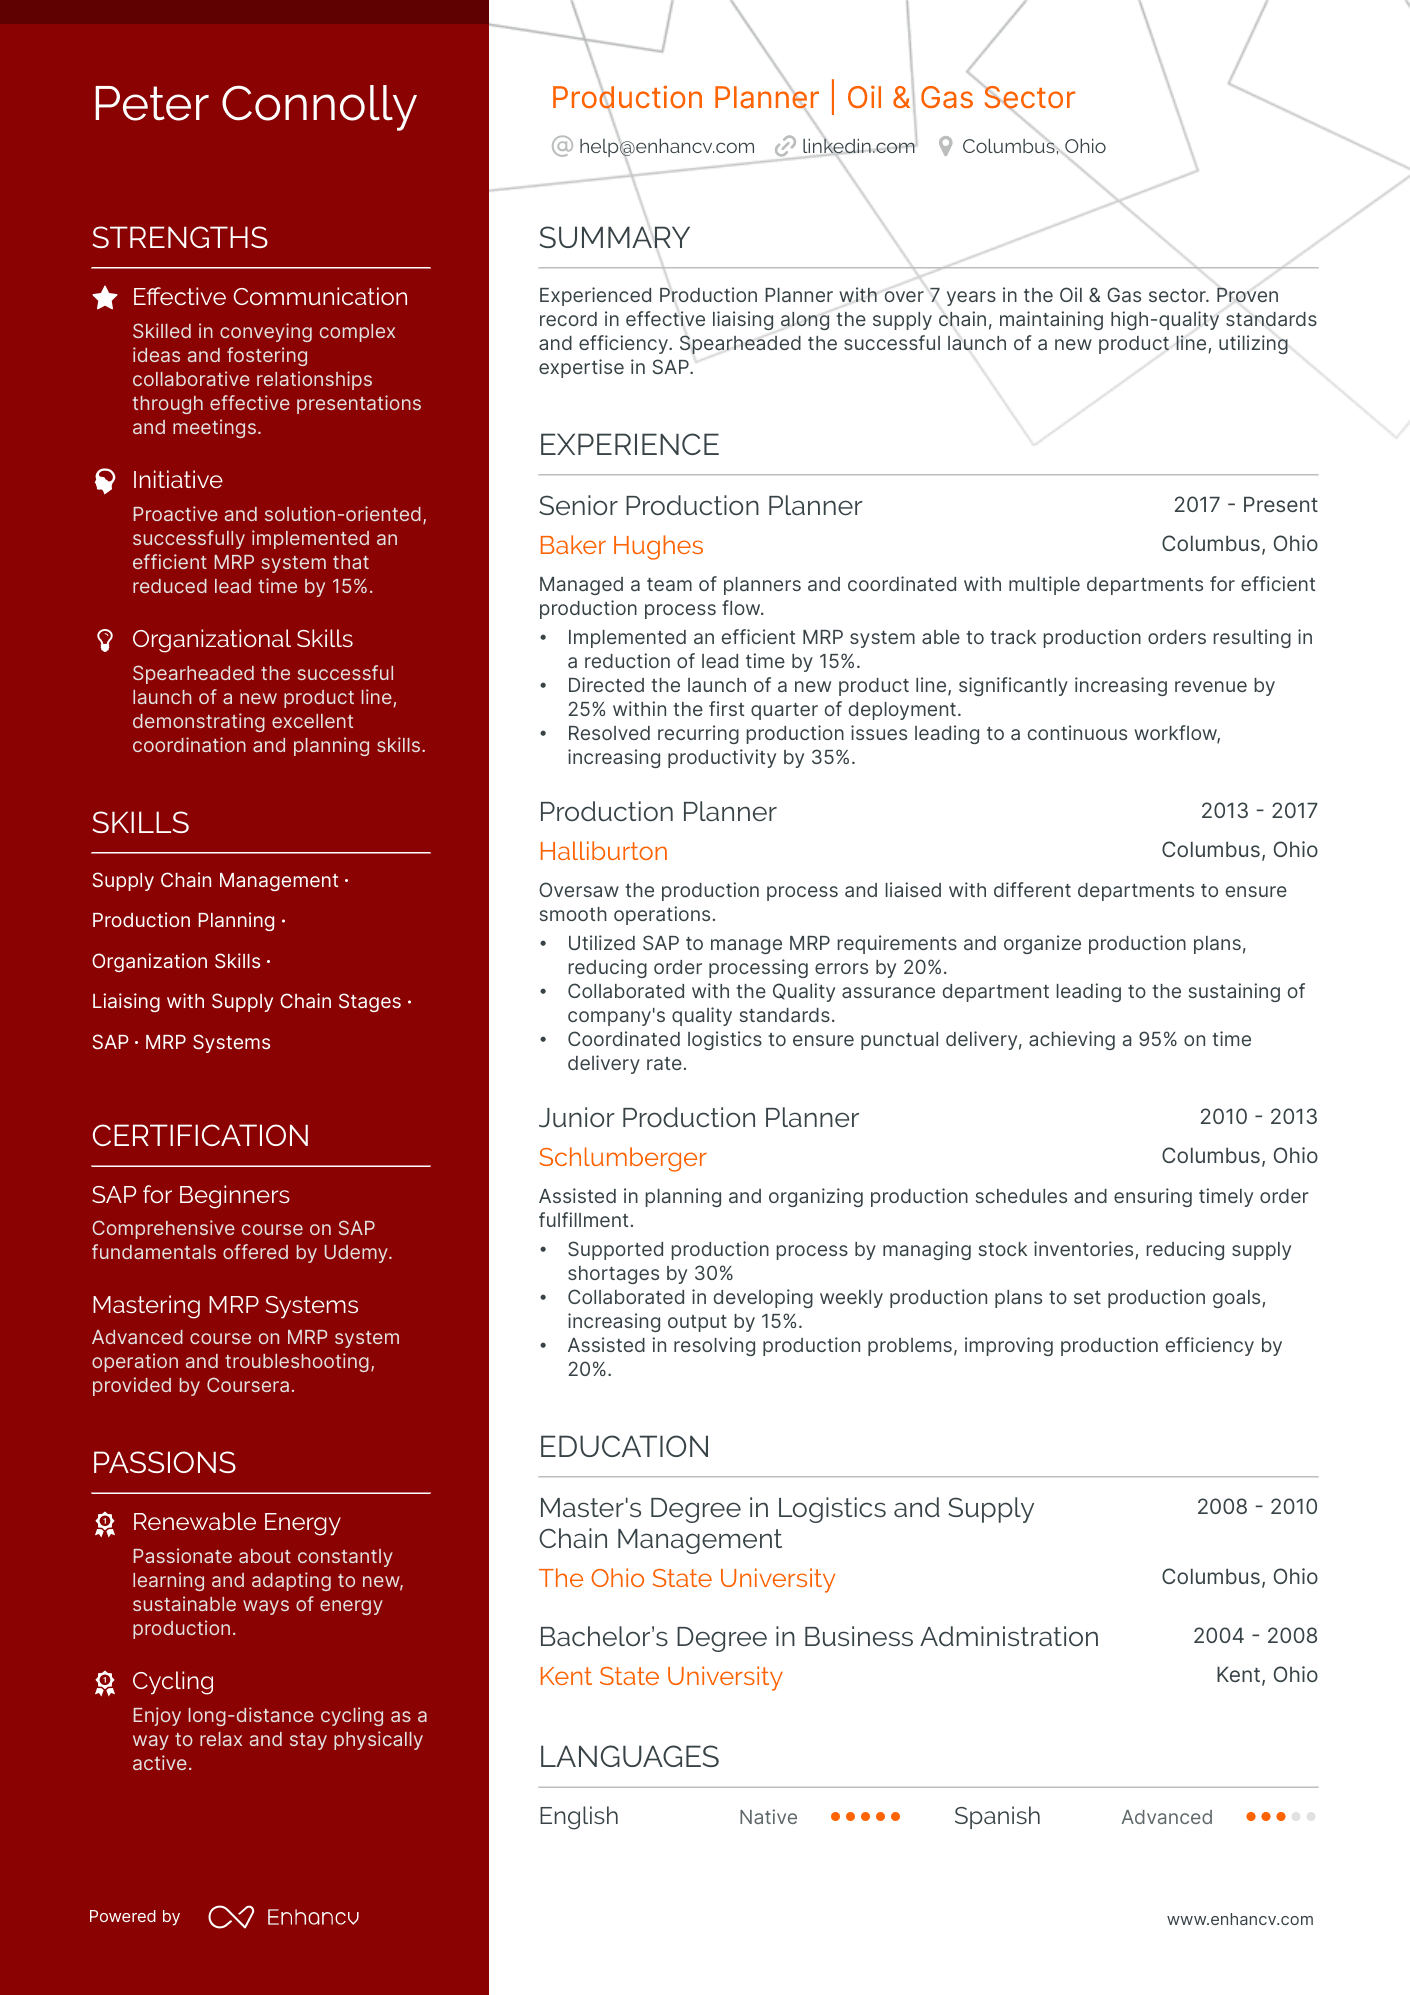 Production Planner resume example